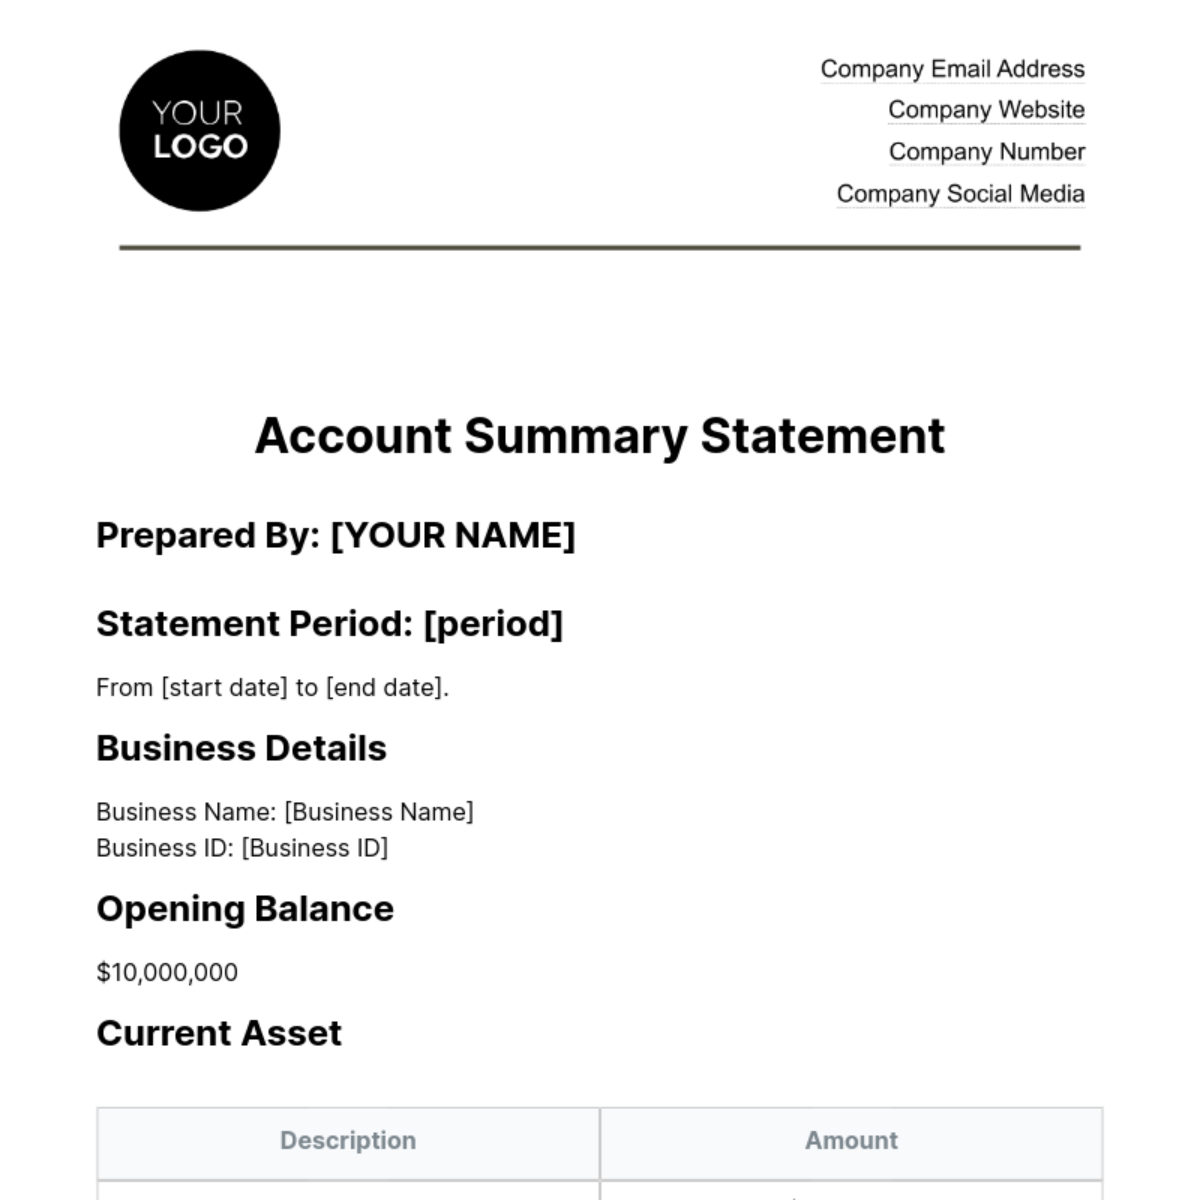 Account Summary Statement Template